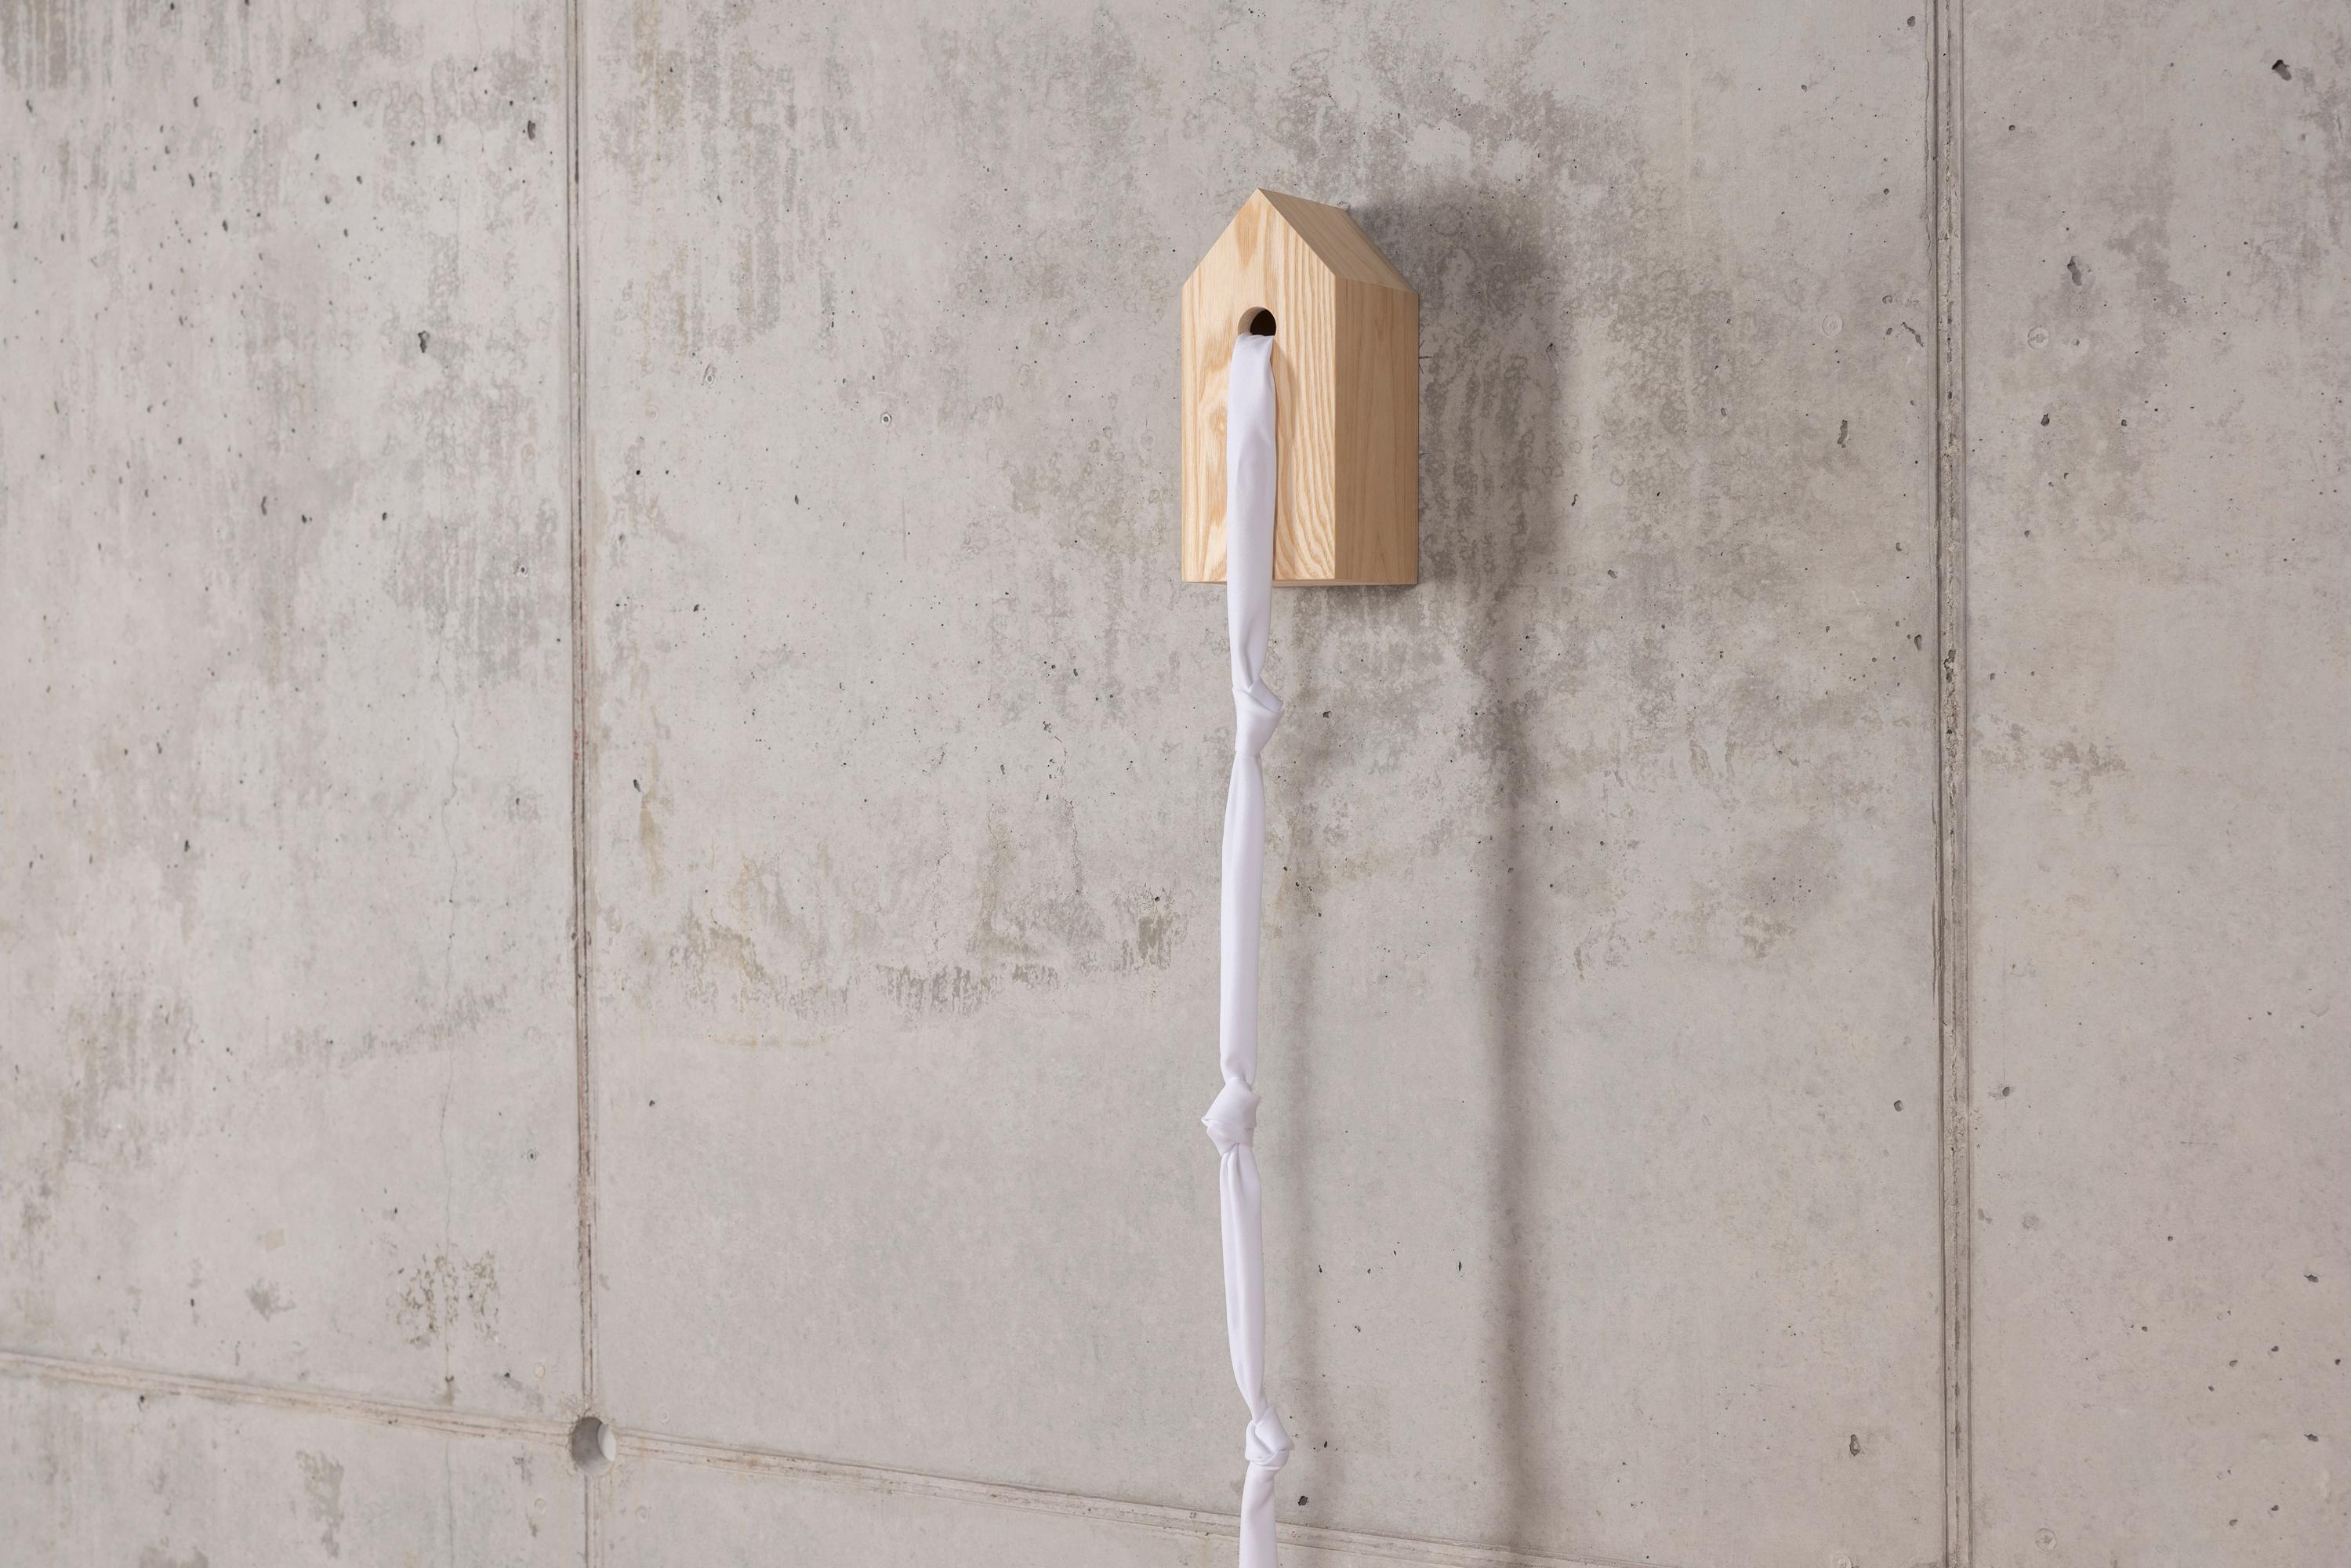 Free as a bird. Escapism at its finest.

This artwork is a birdhouse which has knotted white sheets hanging from them. The birdhouse is handmade from ashwood and has a mounting system designed into the wood, on the back. De knotted white sheets are